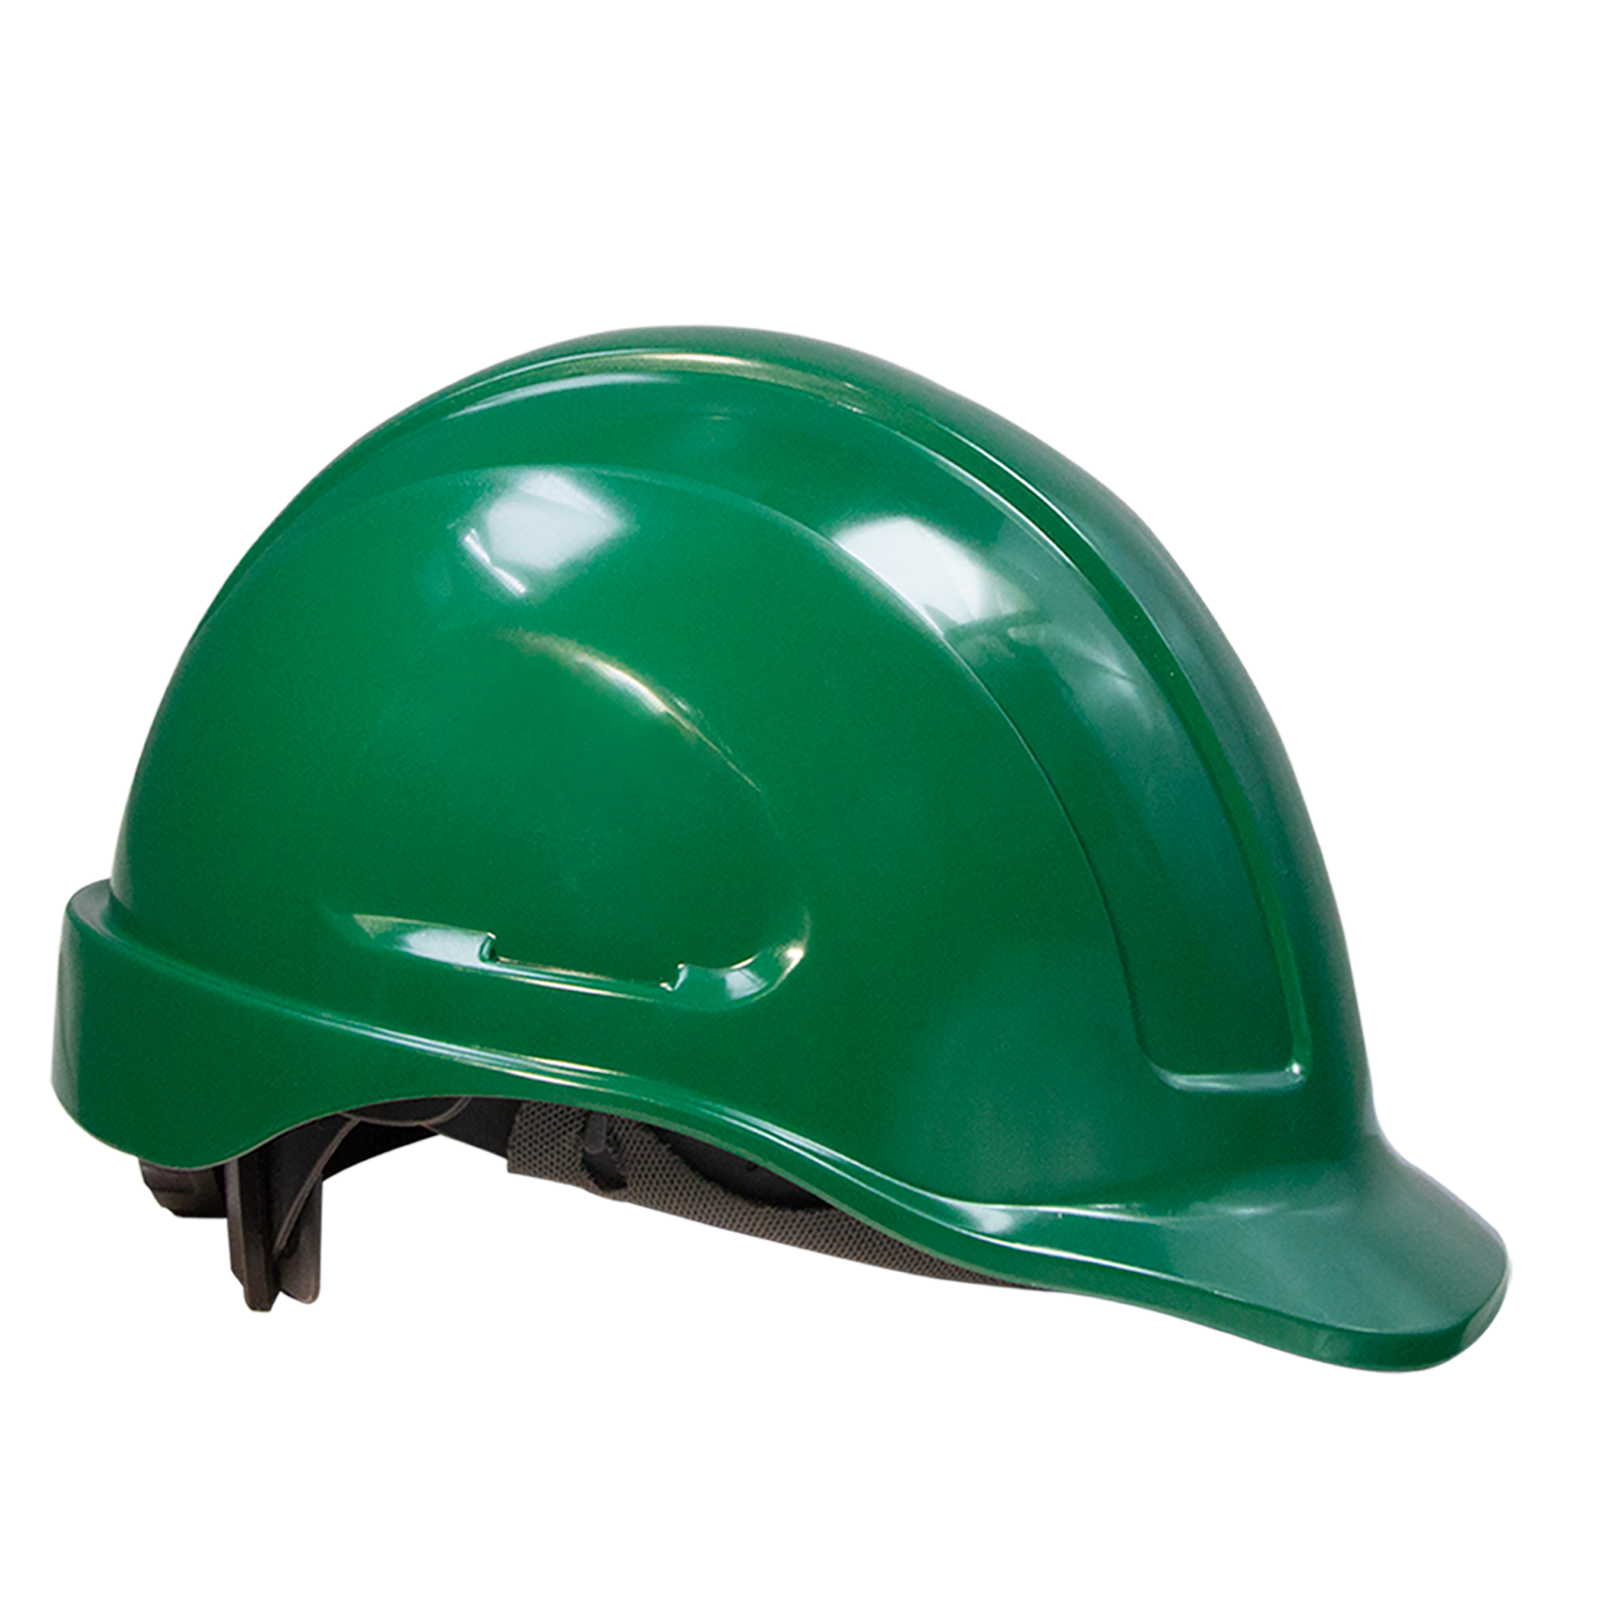 Green hard hat with slots compatible with JORESTECH Earmuffs